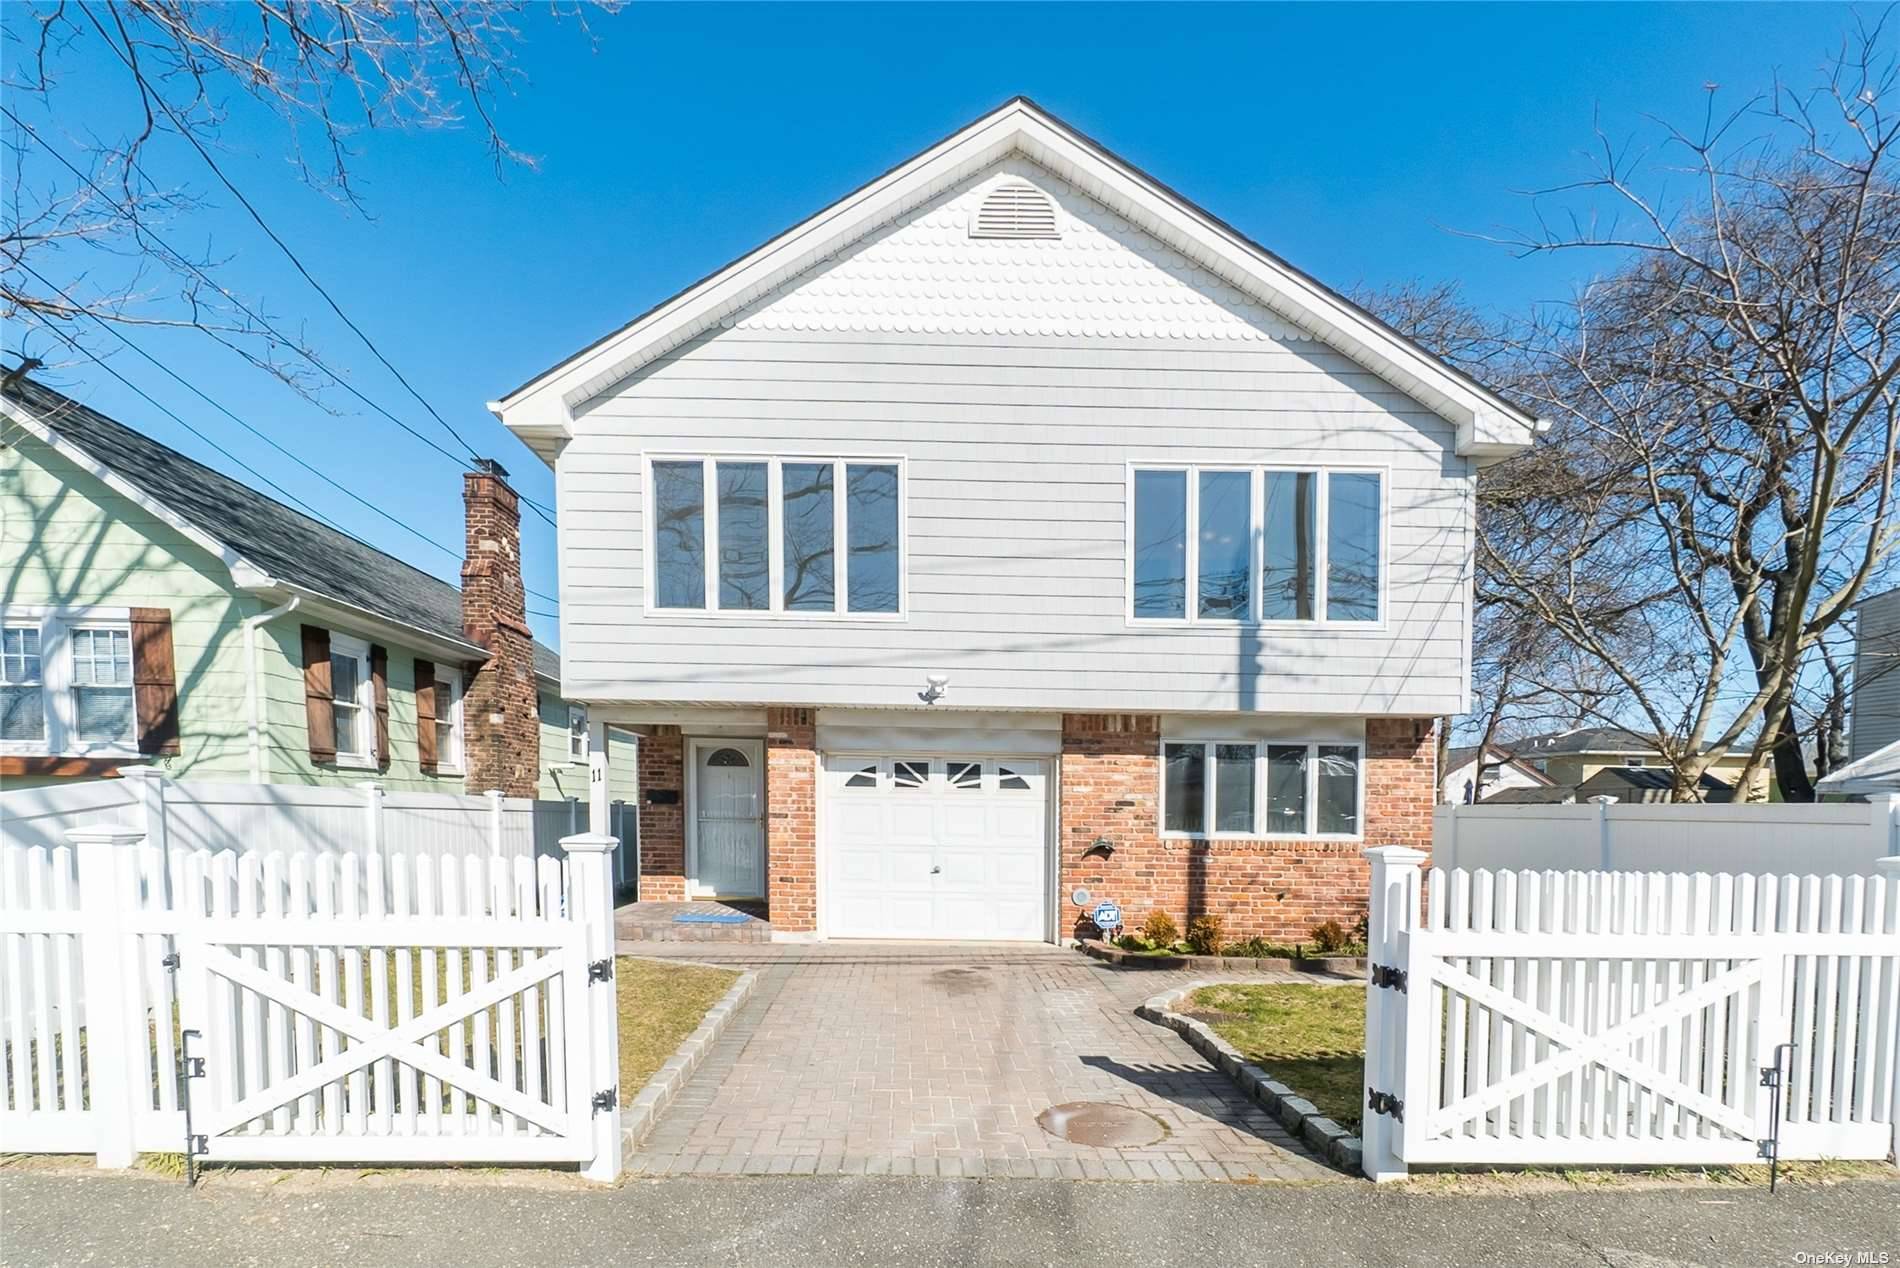 Home by the Beach ! Beautiful home for rent, completely renovated with gleaming wood floors, open floor plan, cathedral ceilings, Living Room, Dining Room, Updated Eat in Kitchen, 4 Bedrooms, ...